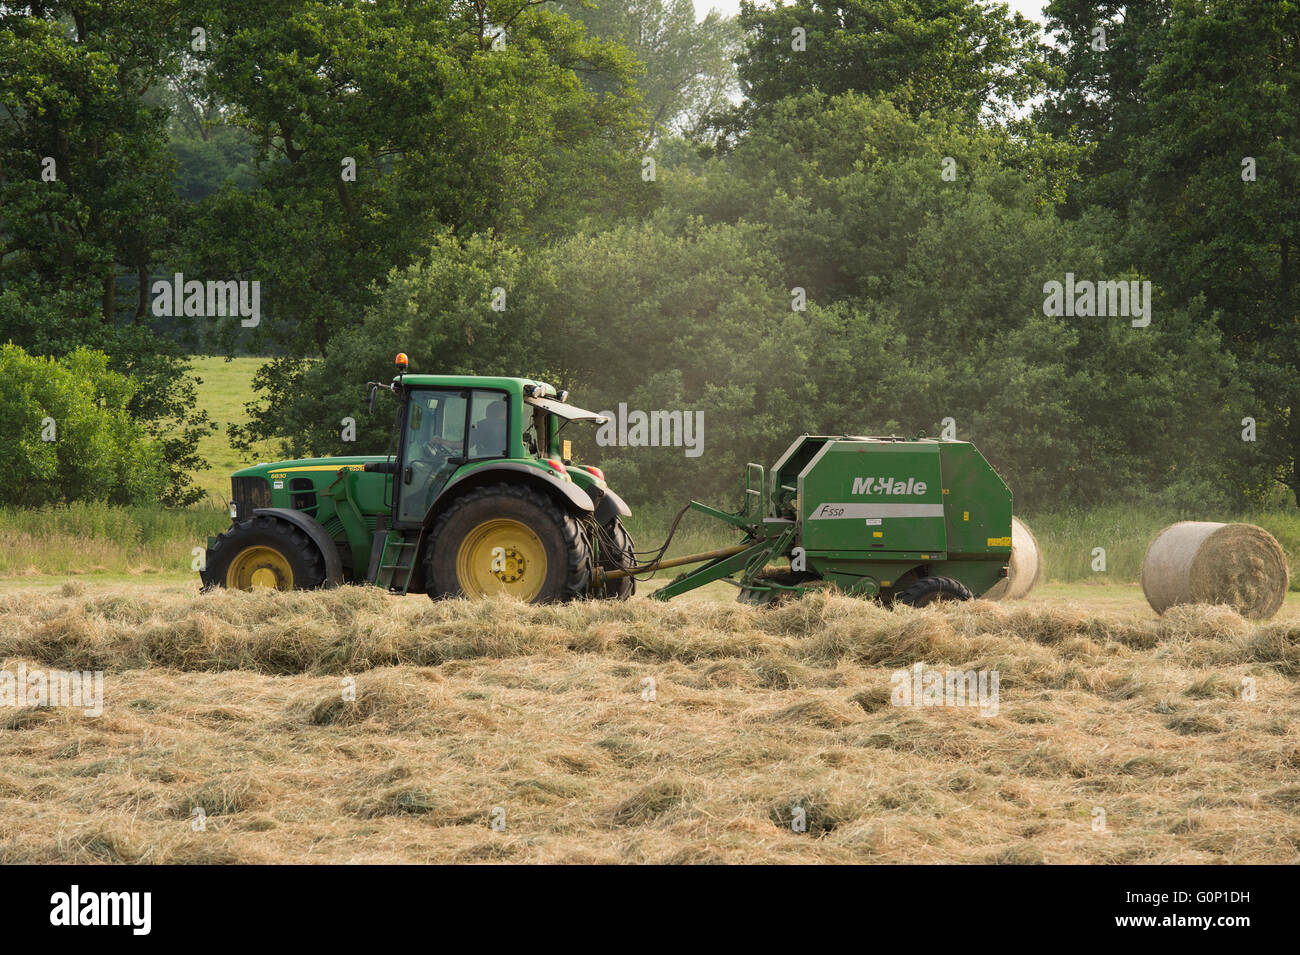 Silage making - Farm tractor pulling a round baler is working in a field at Great Ouseburn, North Yorkshire, England. Stock Photo